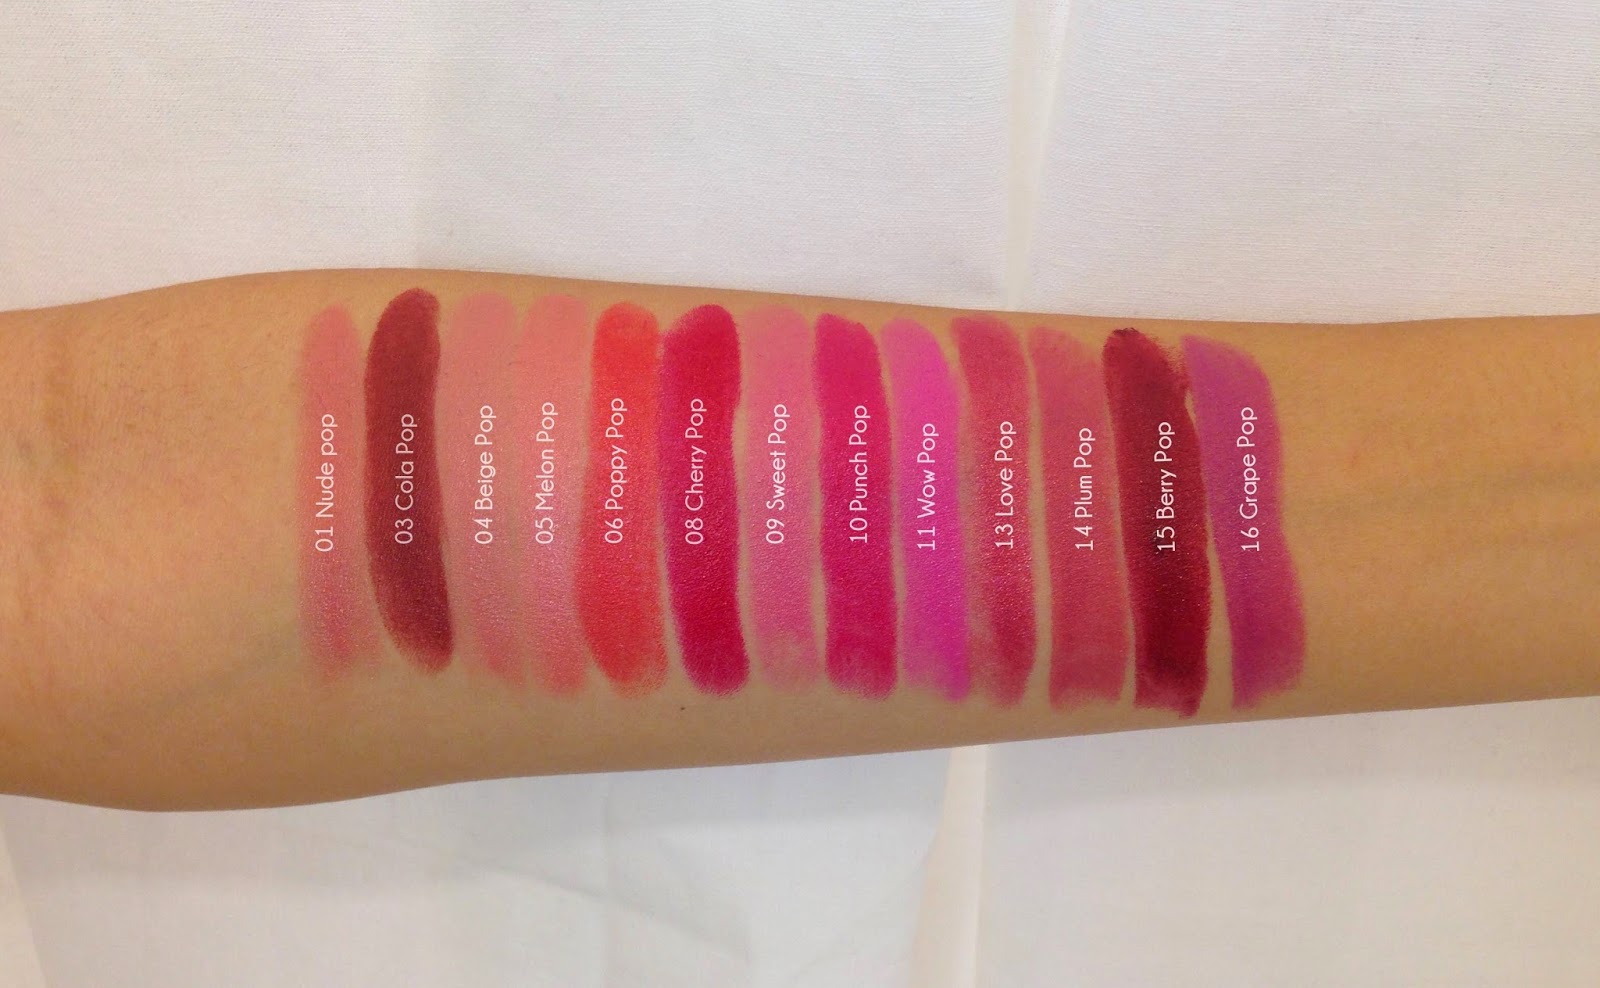 Kymm Beauty Lifestyle Travel Clinique Pop Lips Swatches Review.